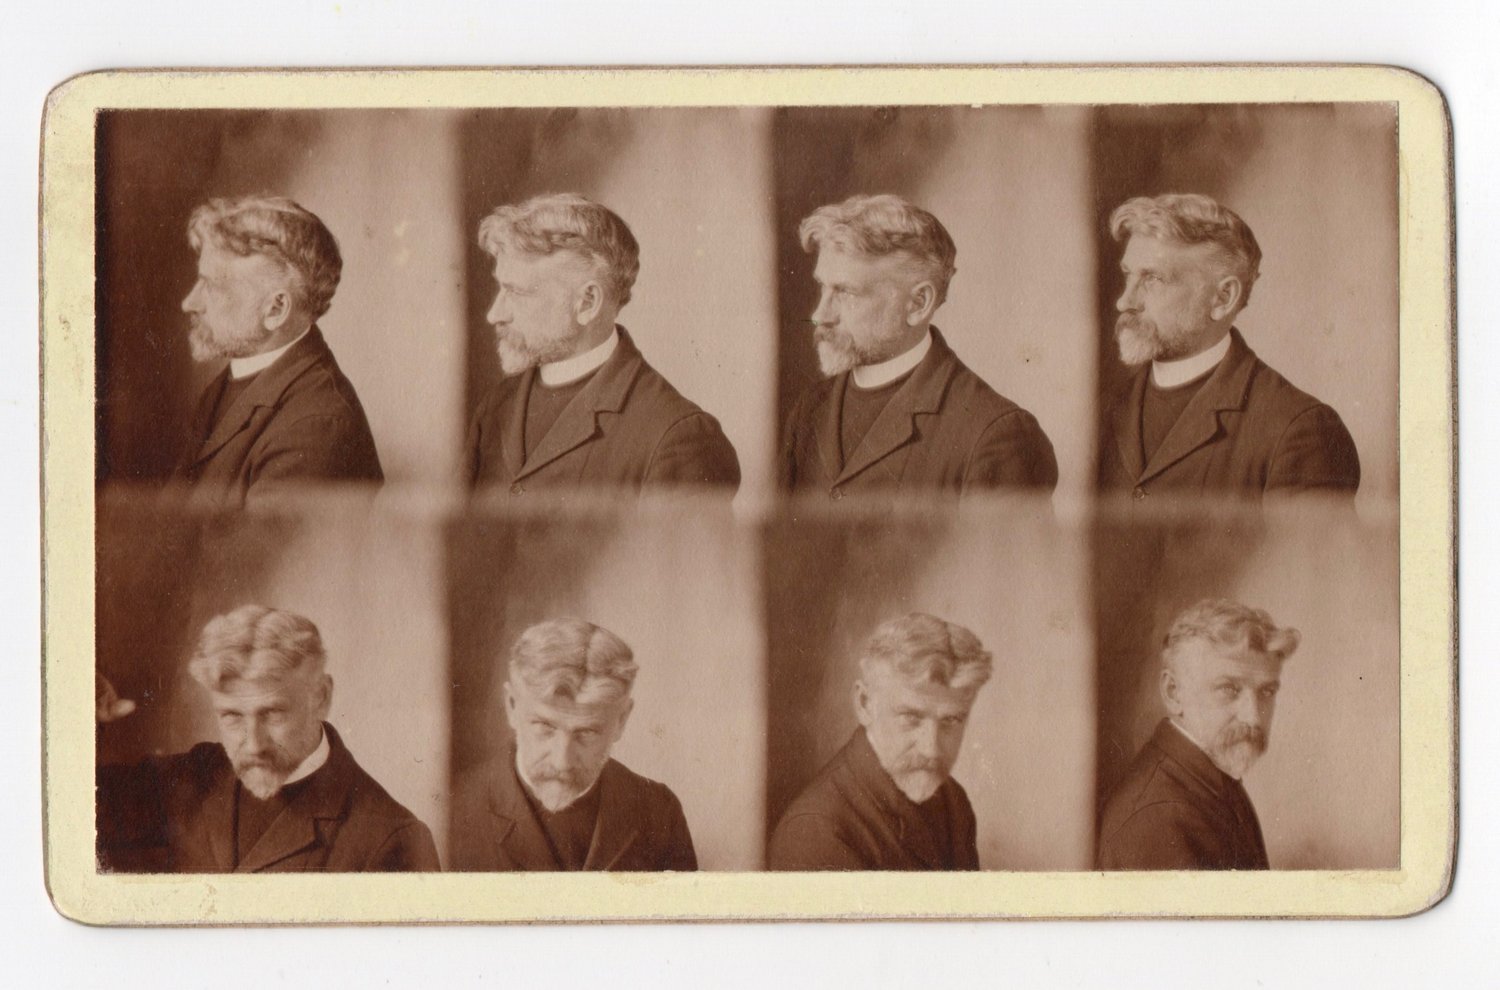 Image of Anonyme: multiple portrait of a man, ca. 1880